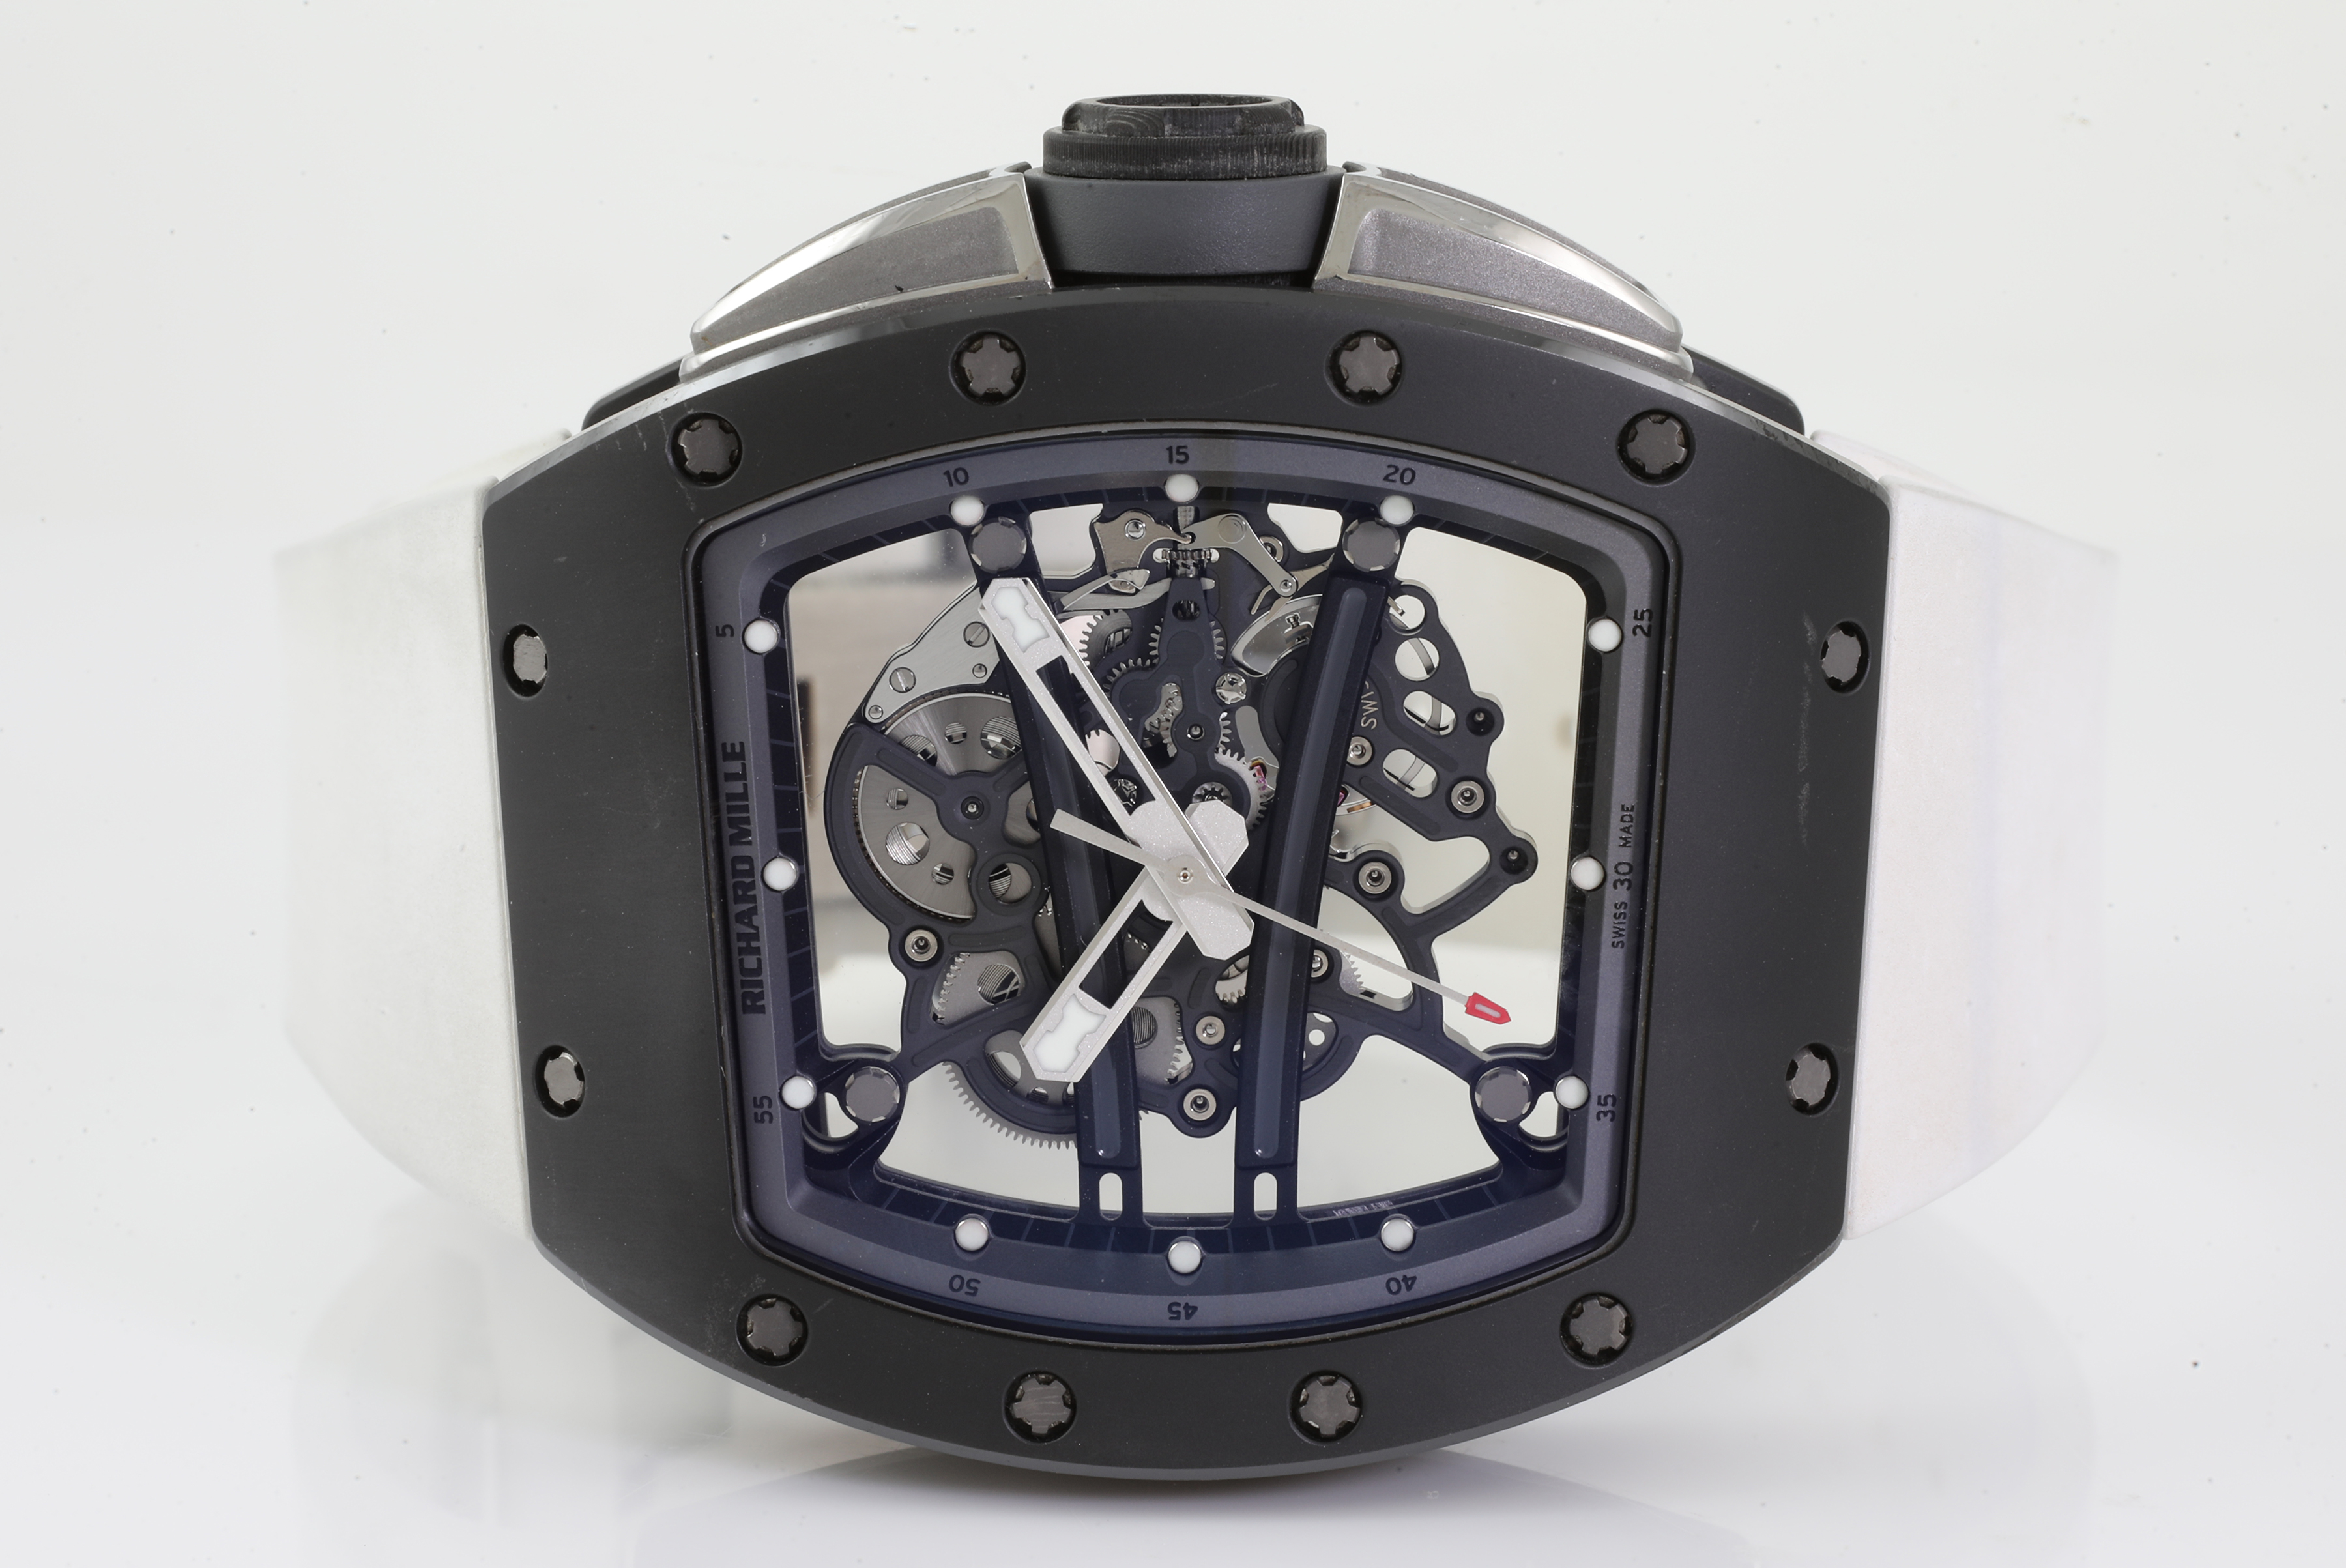 A New Australian Record for a Watch at Auction Richard Mille Yohan Blake Monochrome Limited Edition